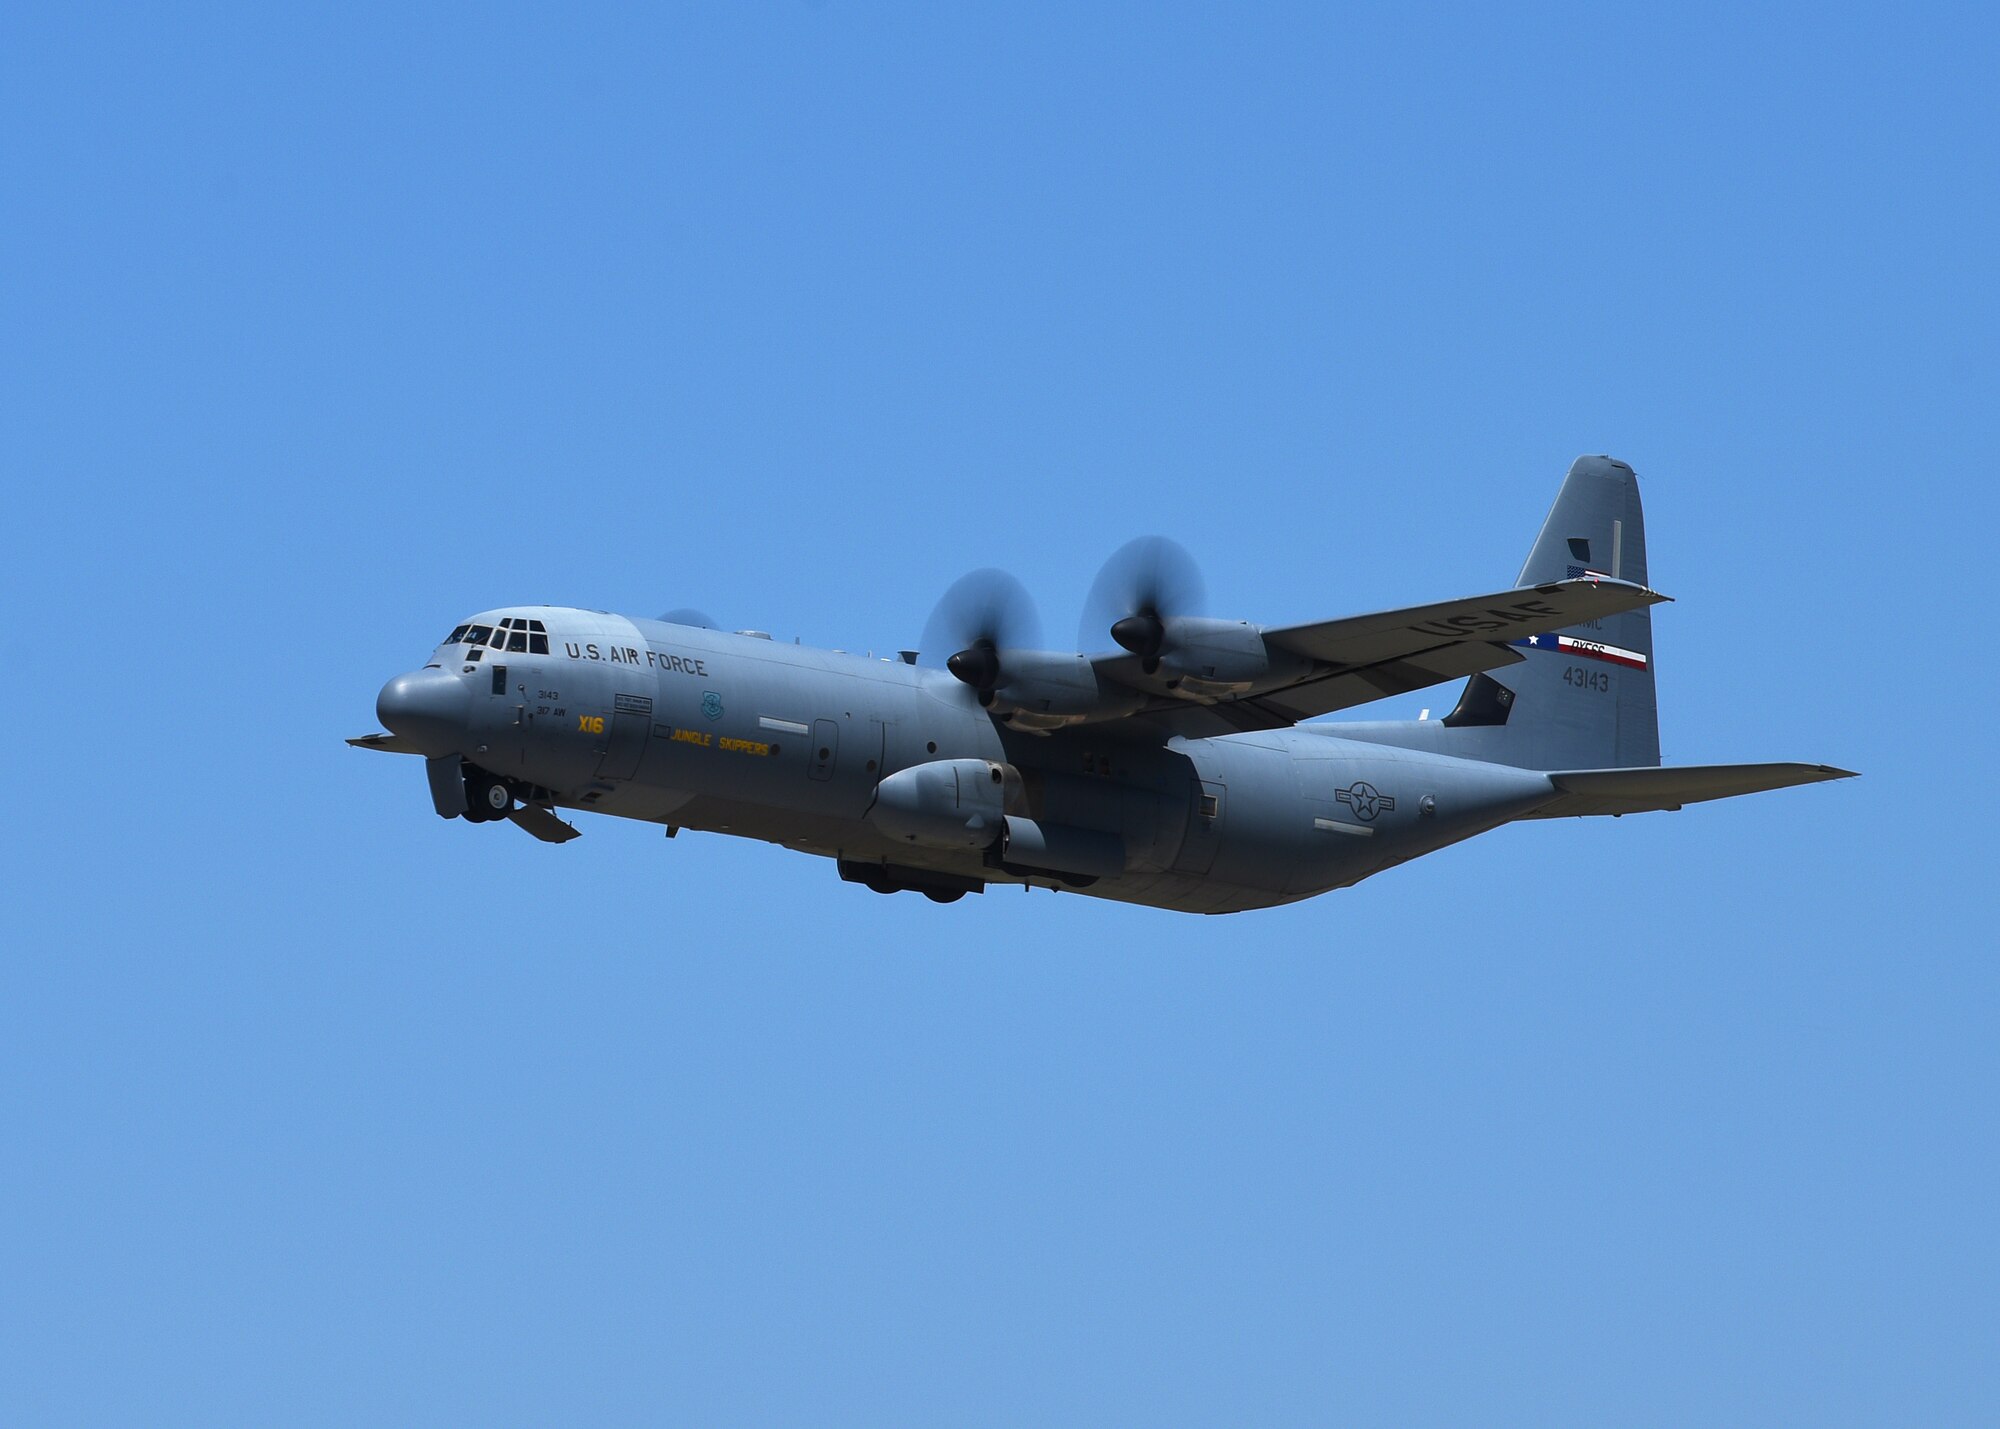 A C-130J Super Hercules takes off from the flightline at Dyess Air Force Base, Texas in preparation for an U.S. Air Force Weapons School Joint Forcible Entry exercise June 6, 2020. Approximately eight C-130J aircraft supported the JFE exercise at Nellis AFB, Nev., which is designed to be a large-scale air drop and land mobility mission. (U.S. Air Force photo by Senior Airman Mercedes Porter)